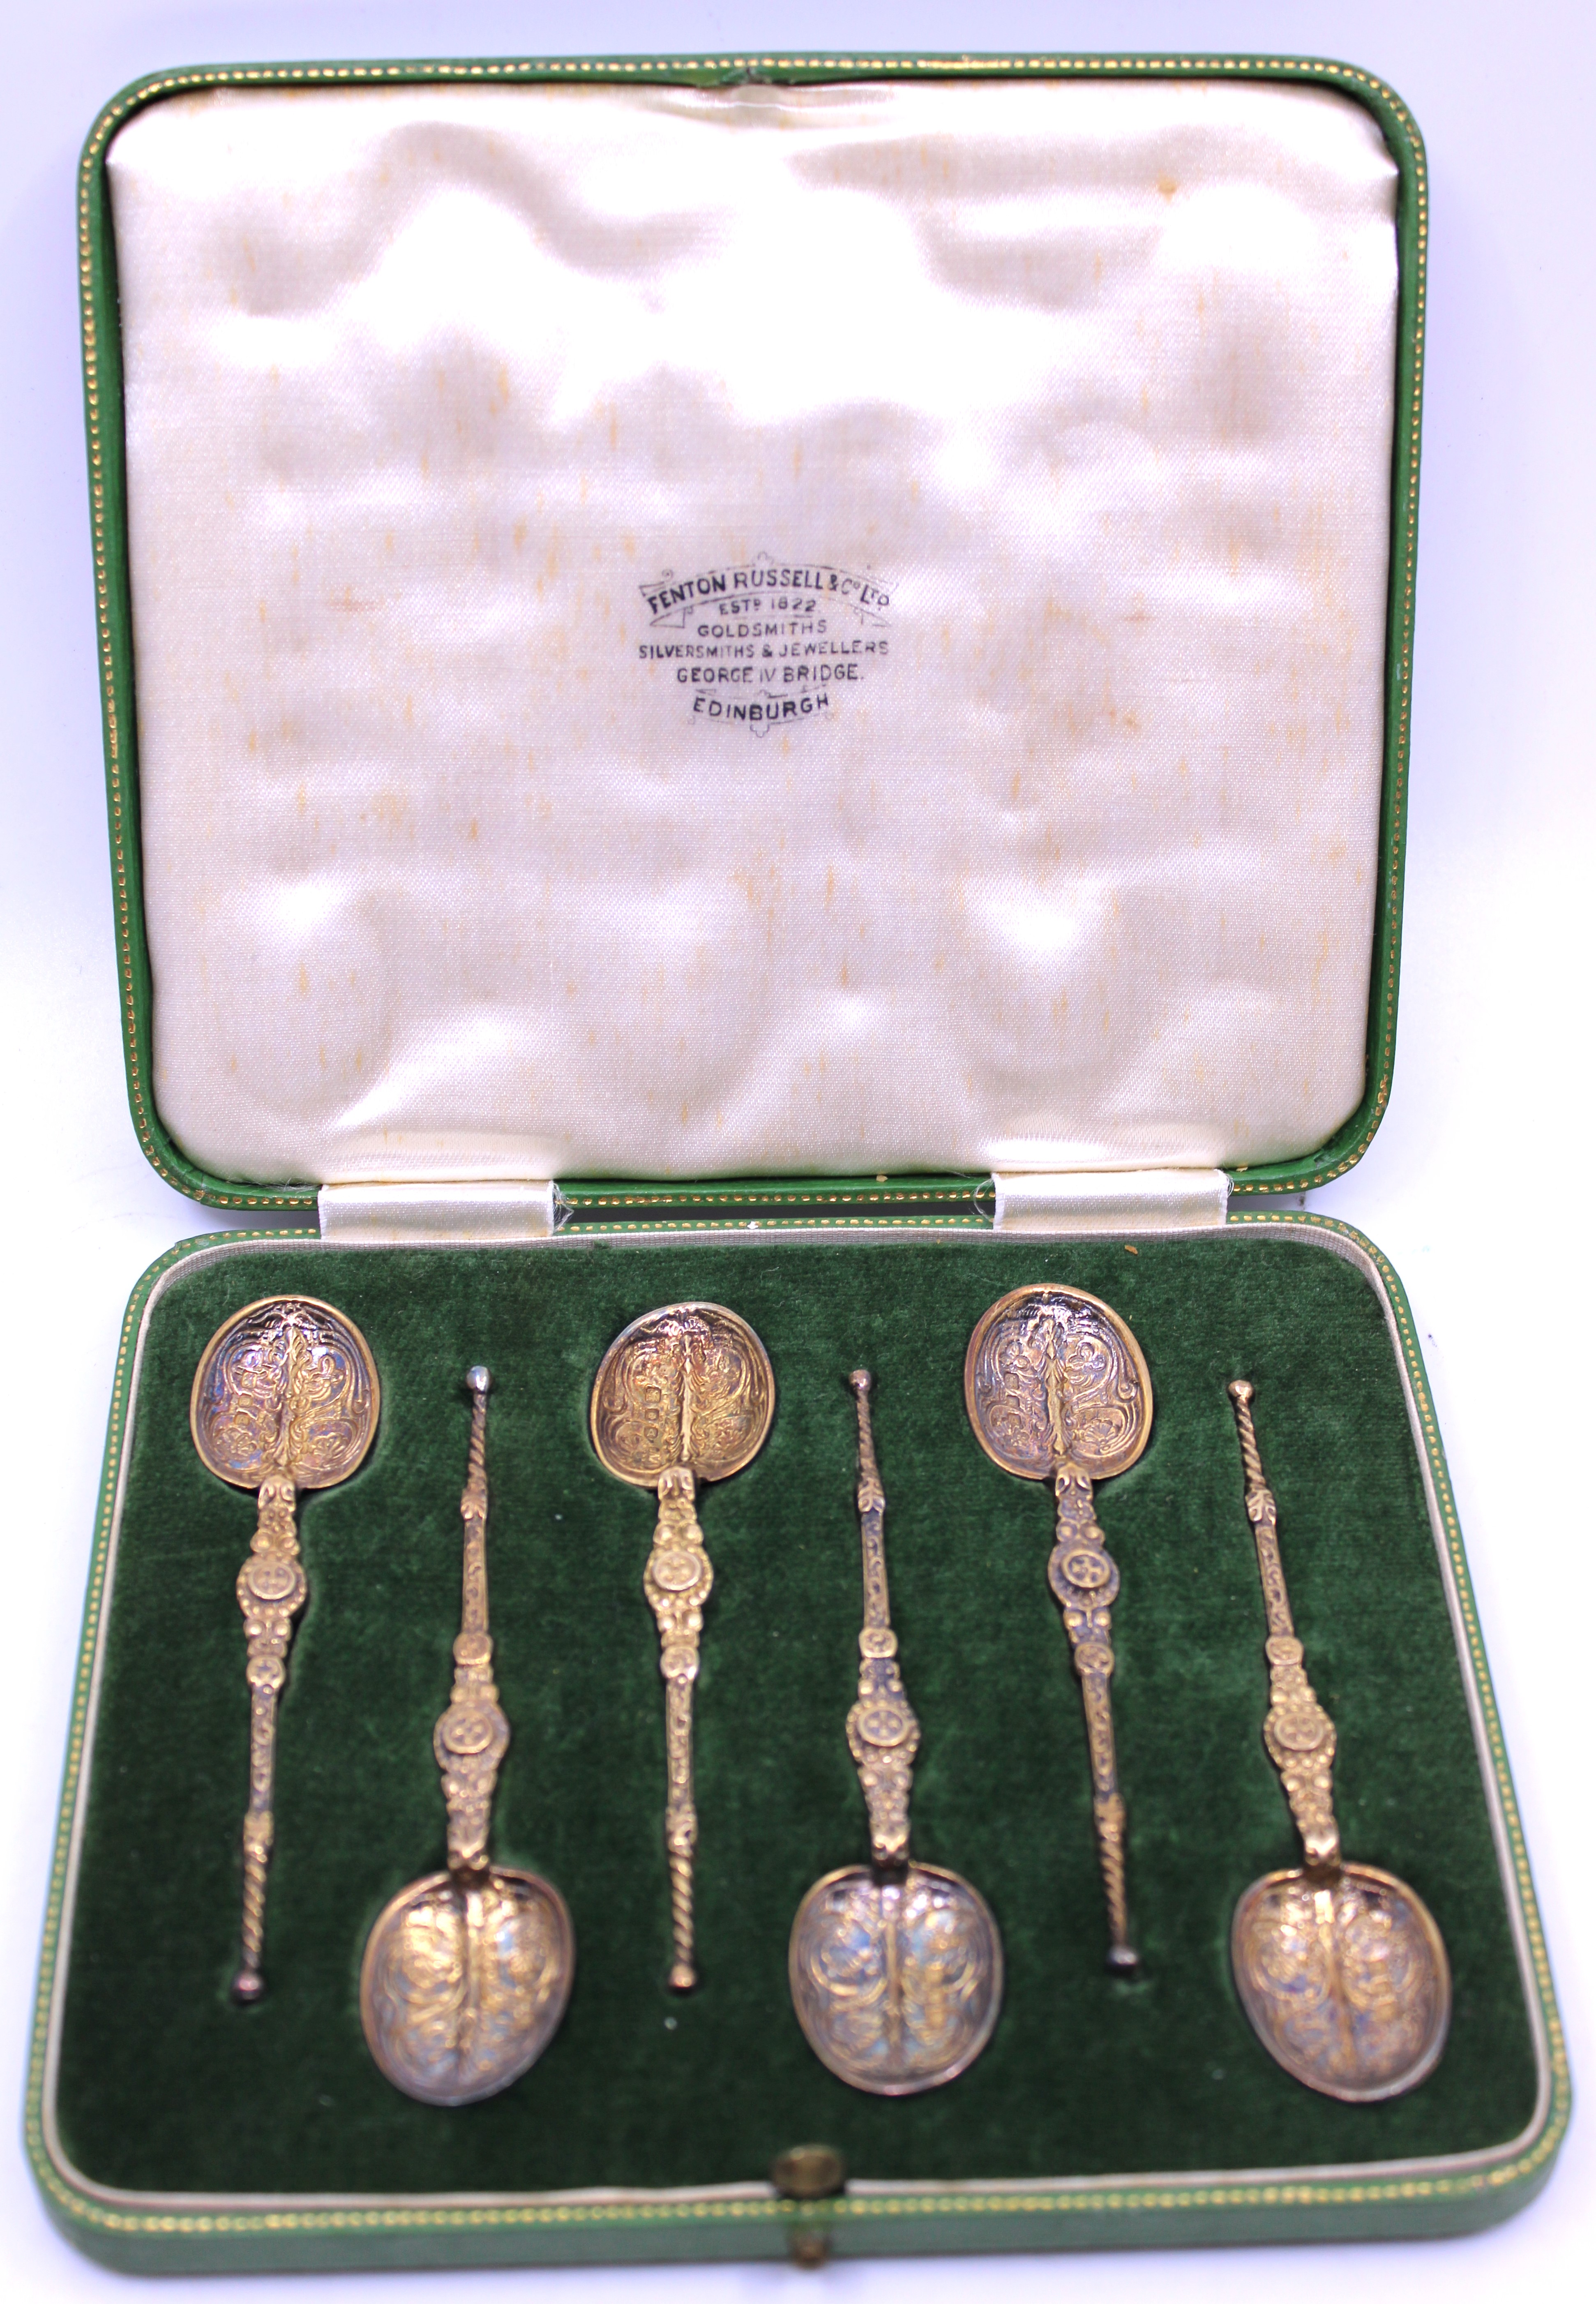 Set of Six Sterling Silver Art Deco Ornate Coffee Spoons. Boxed.  The Spoons are hallmarked with the